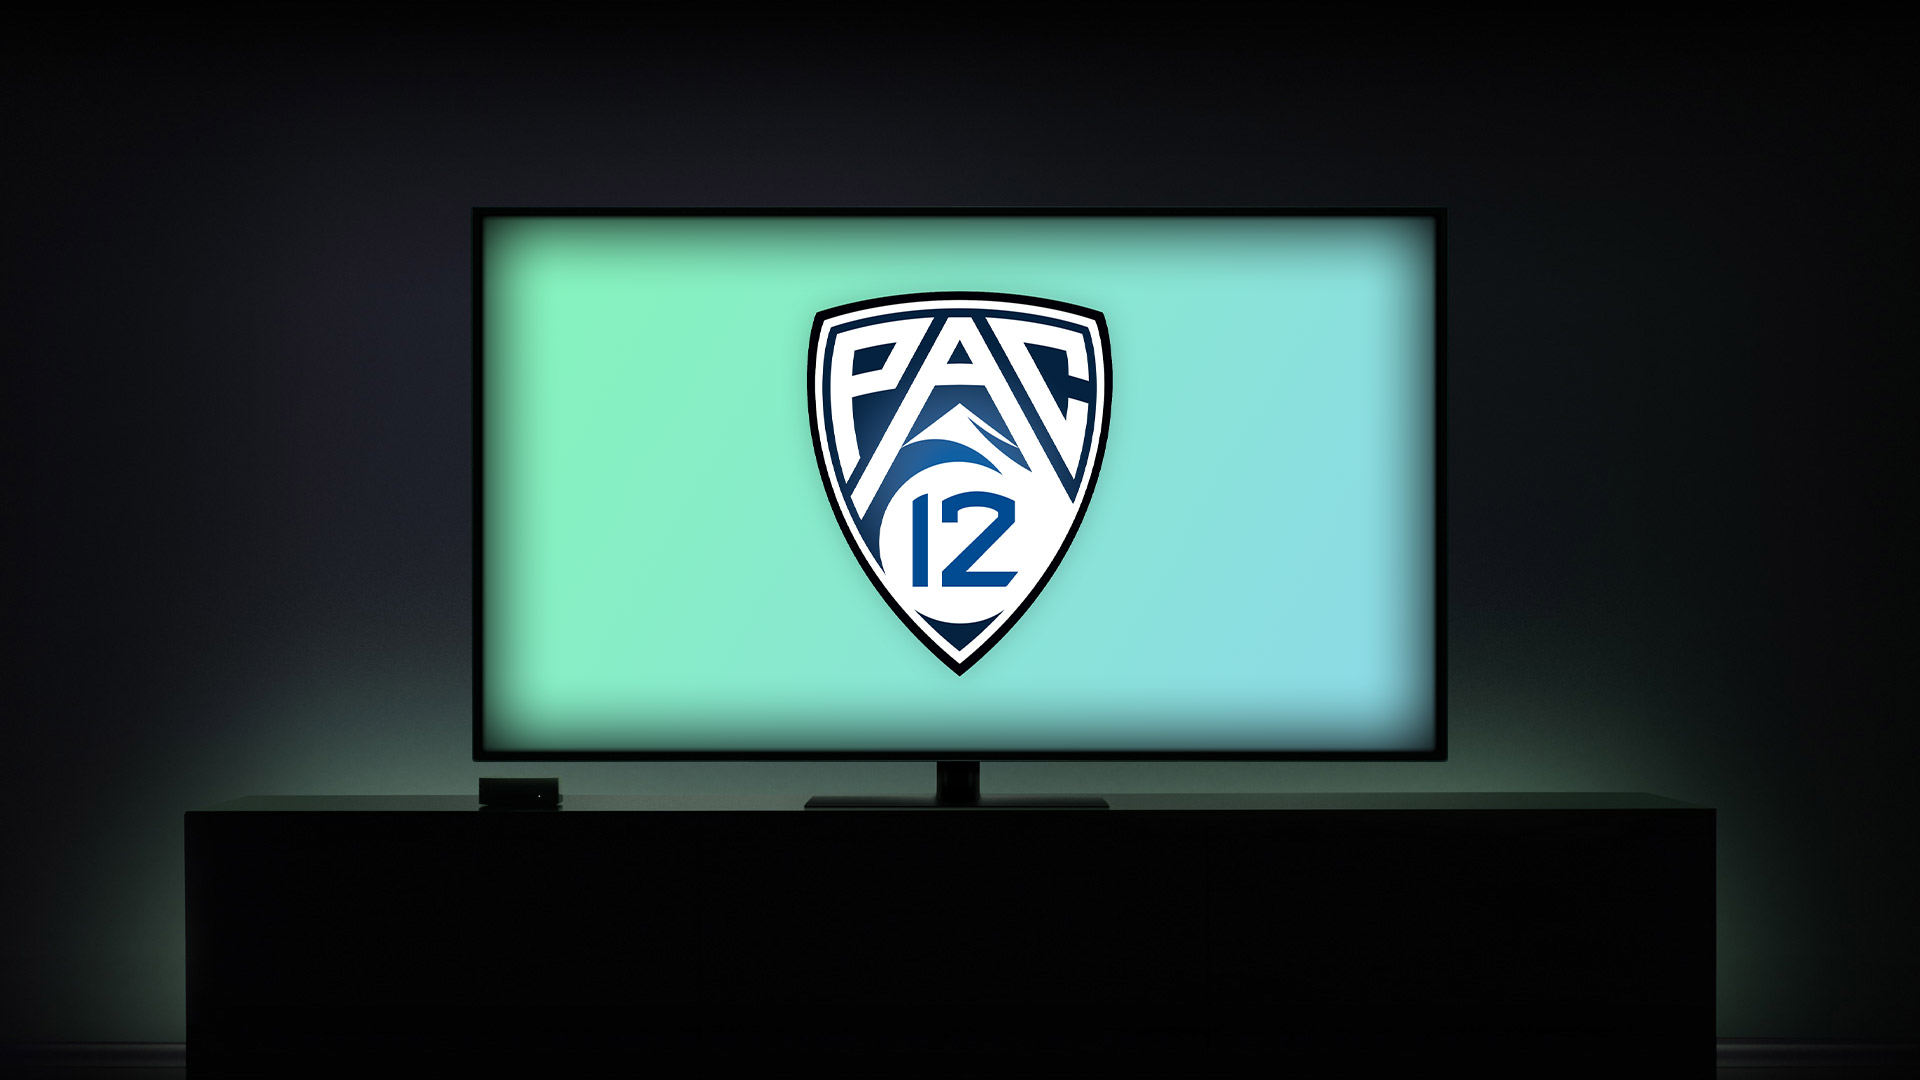 Apple could be new home for Pac-12 football streaming